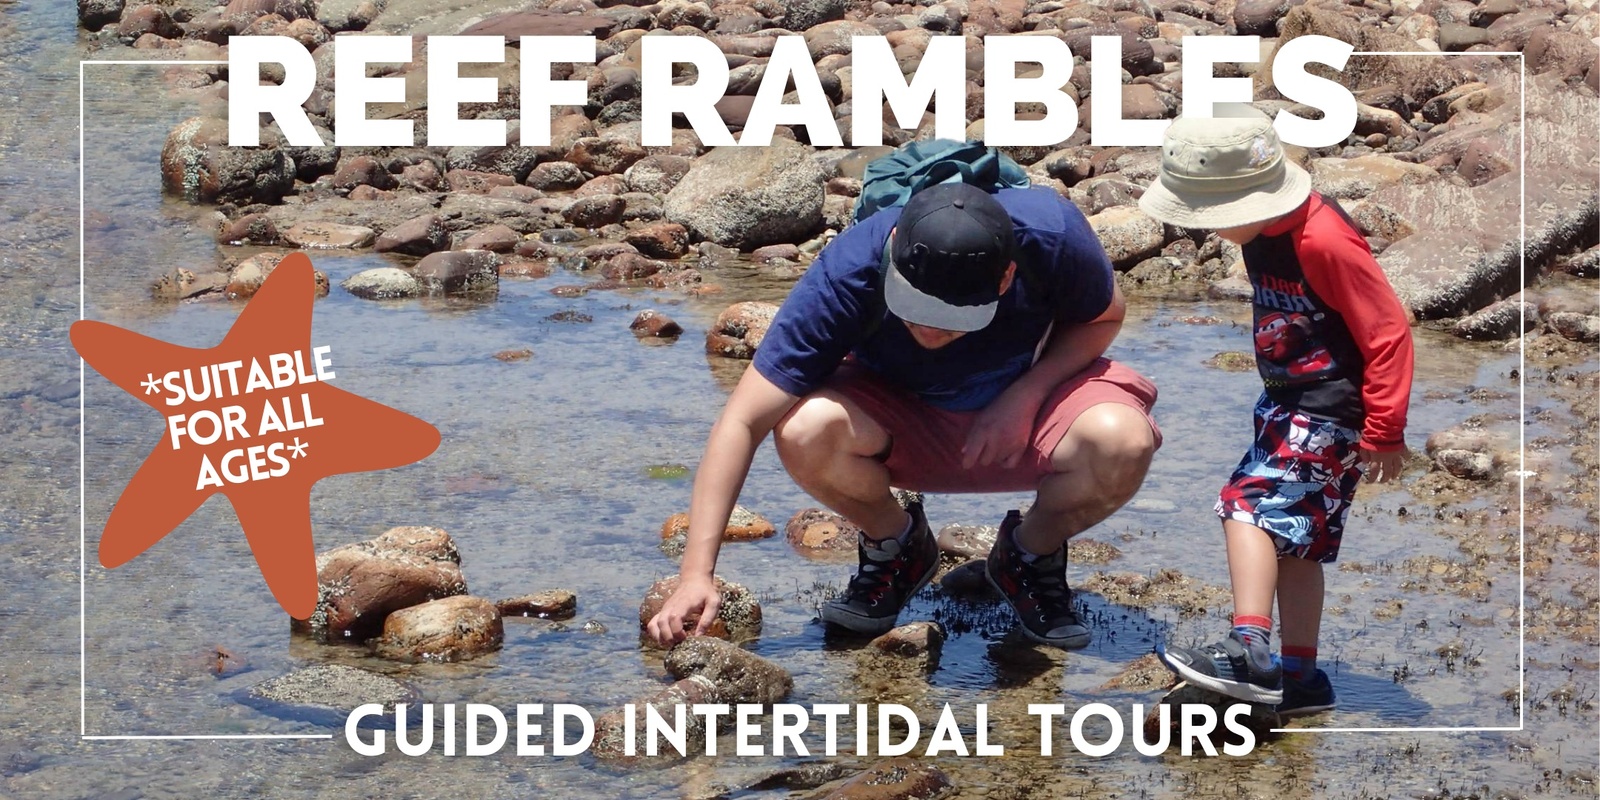 Banner image for REEF RAMBLES: all ages! Hallet Cove, January 21